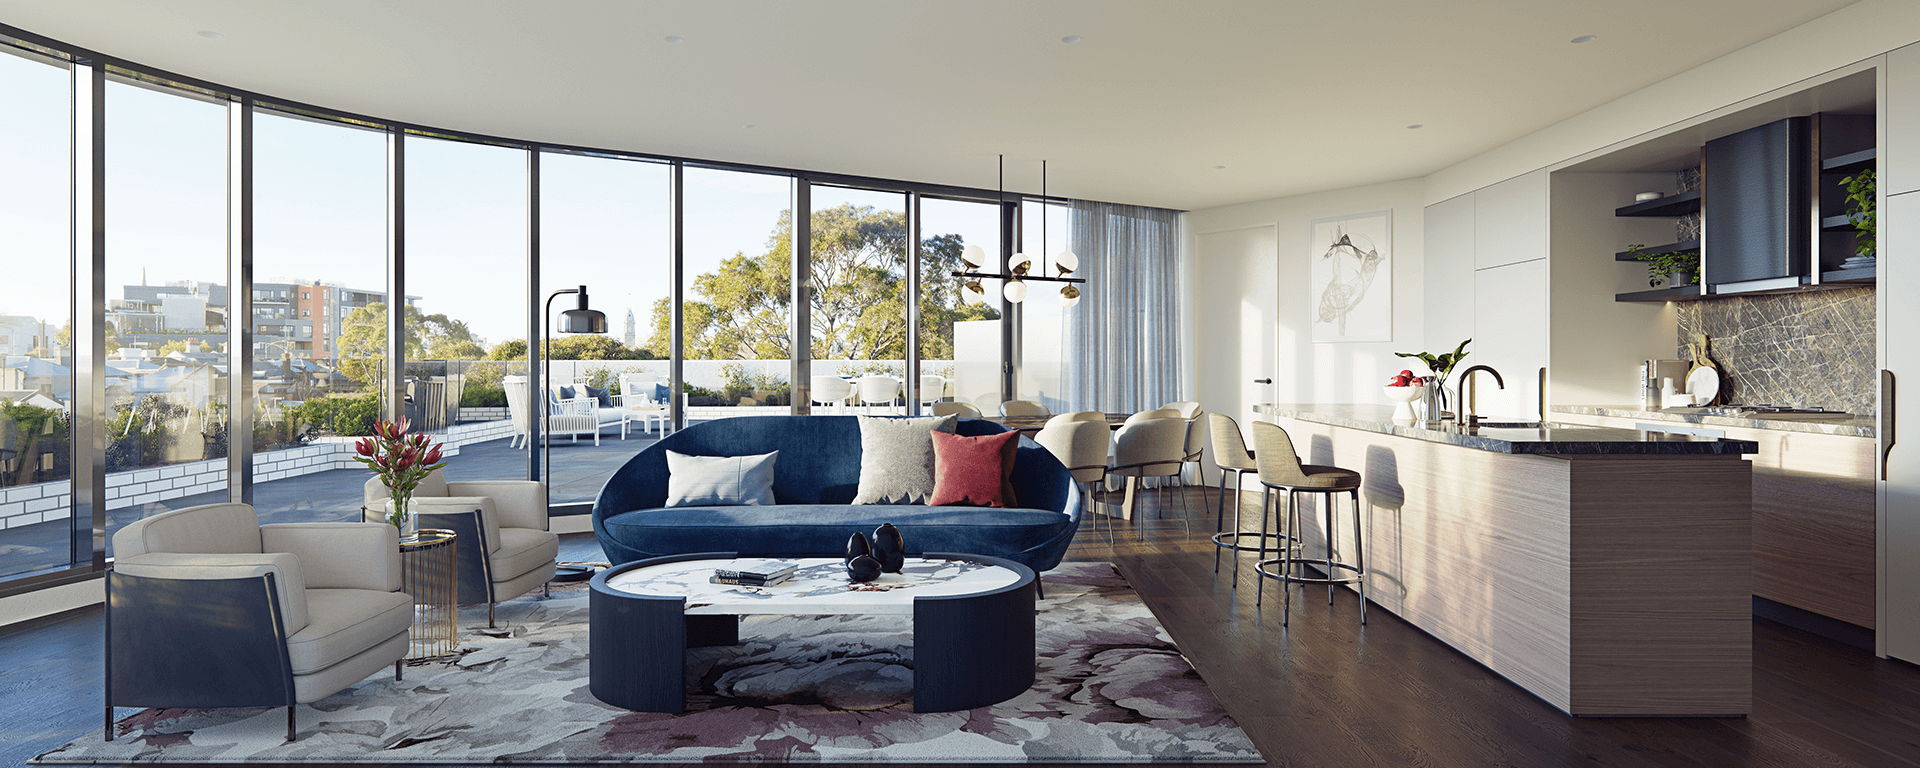 DEFINING THE NEW WEST MELBOURNE